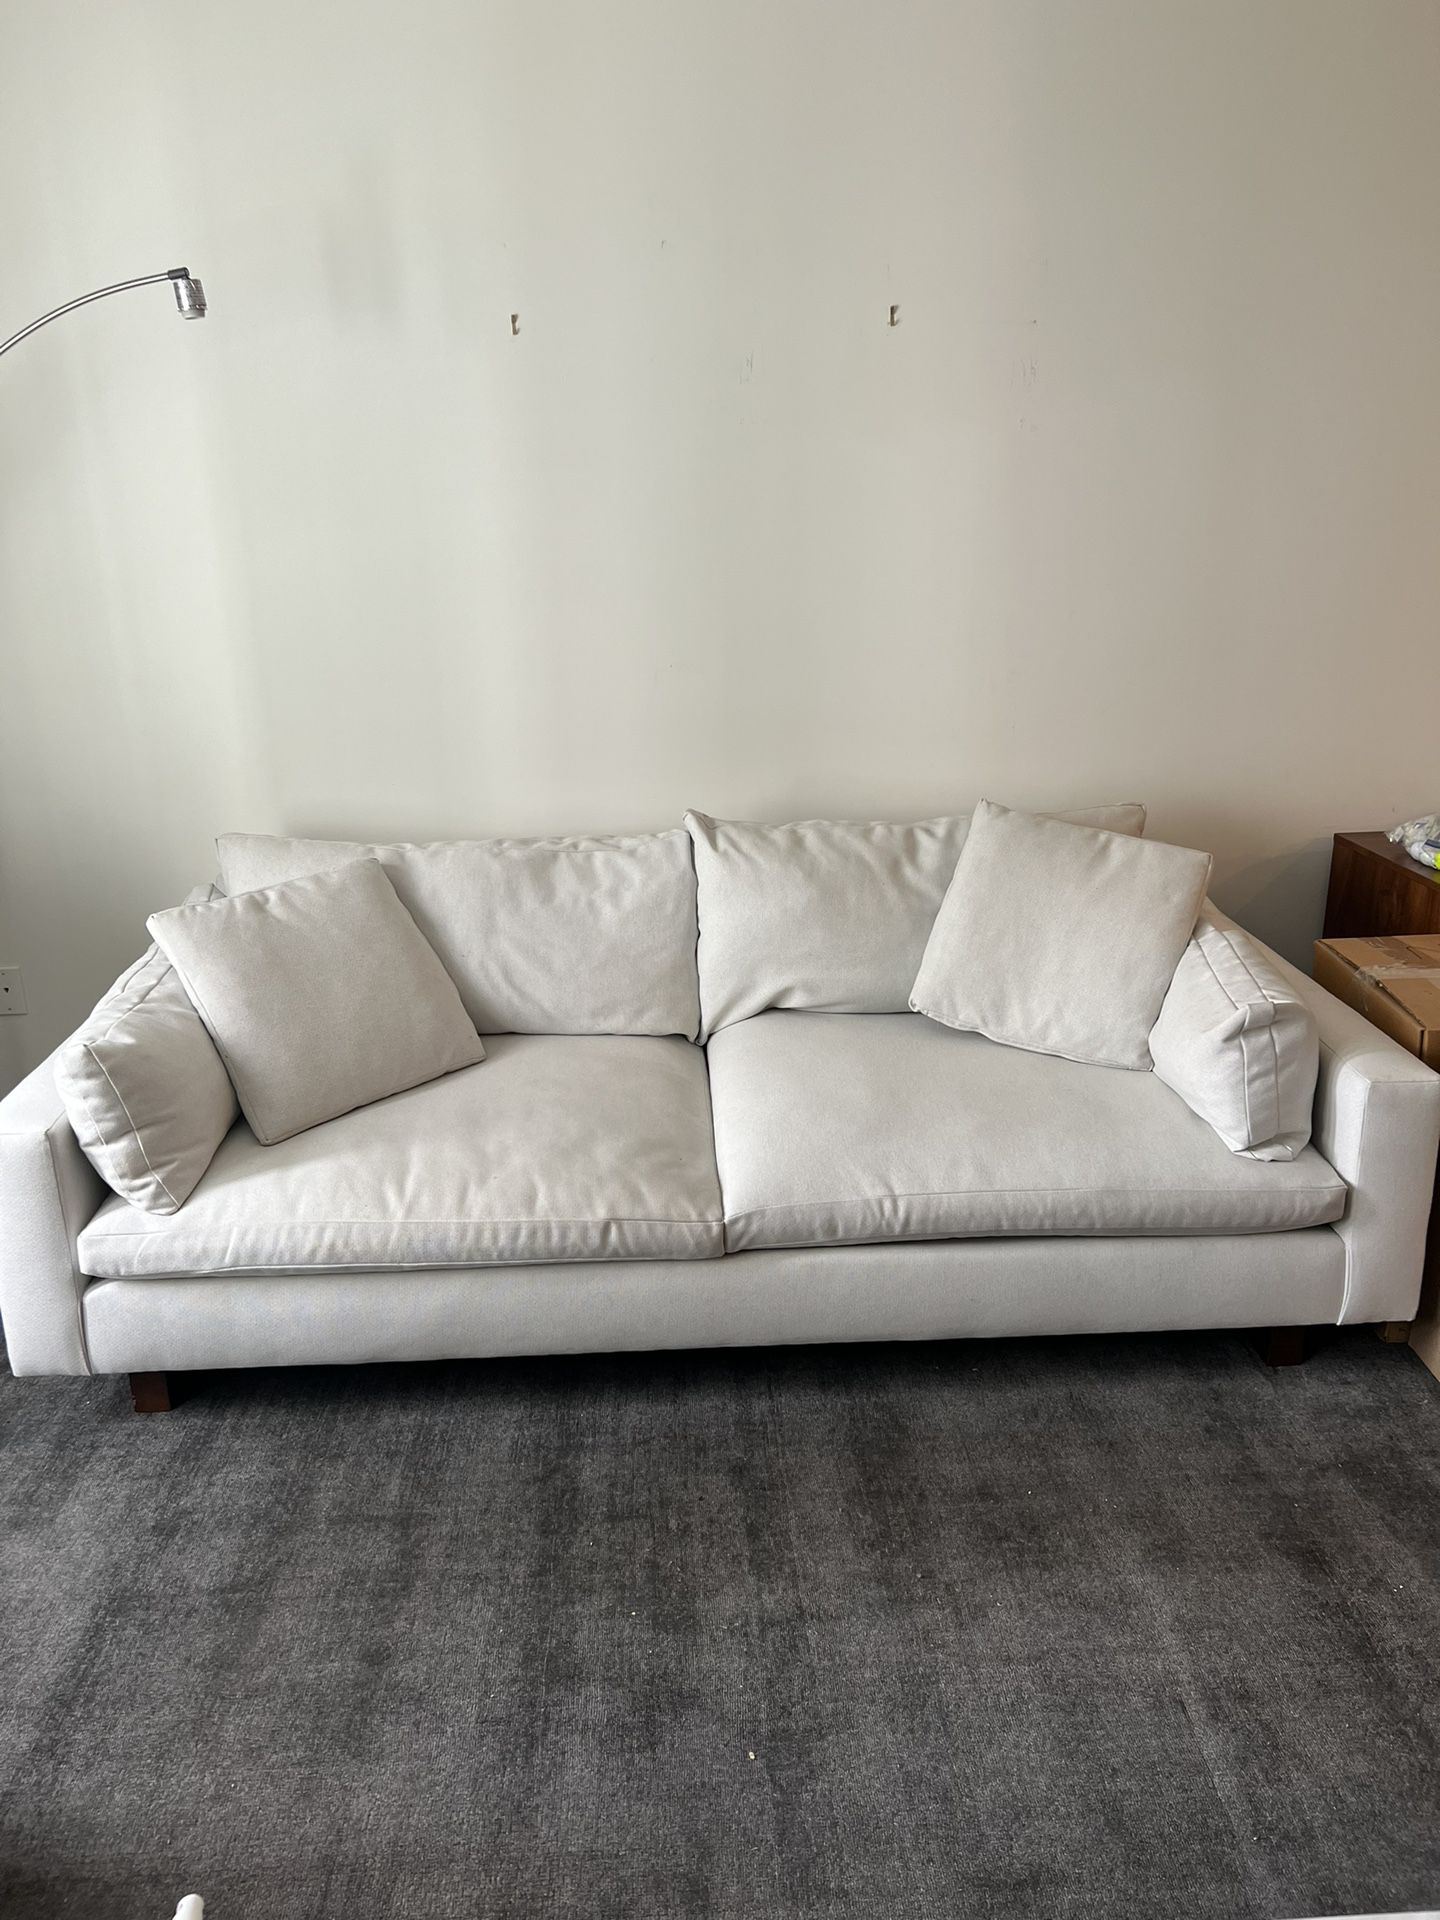 West Elm 92 Harmony Sofa Oyster Color 42 Depth For In Kansas City Mo Offerup